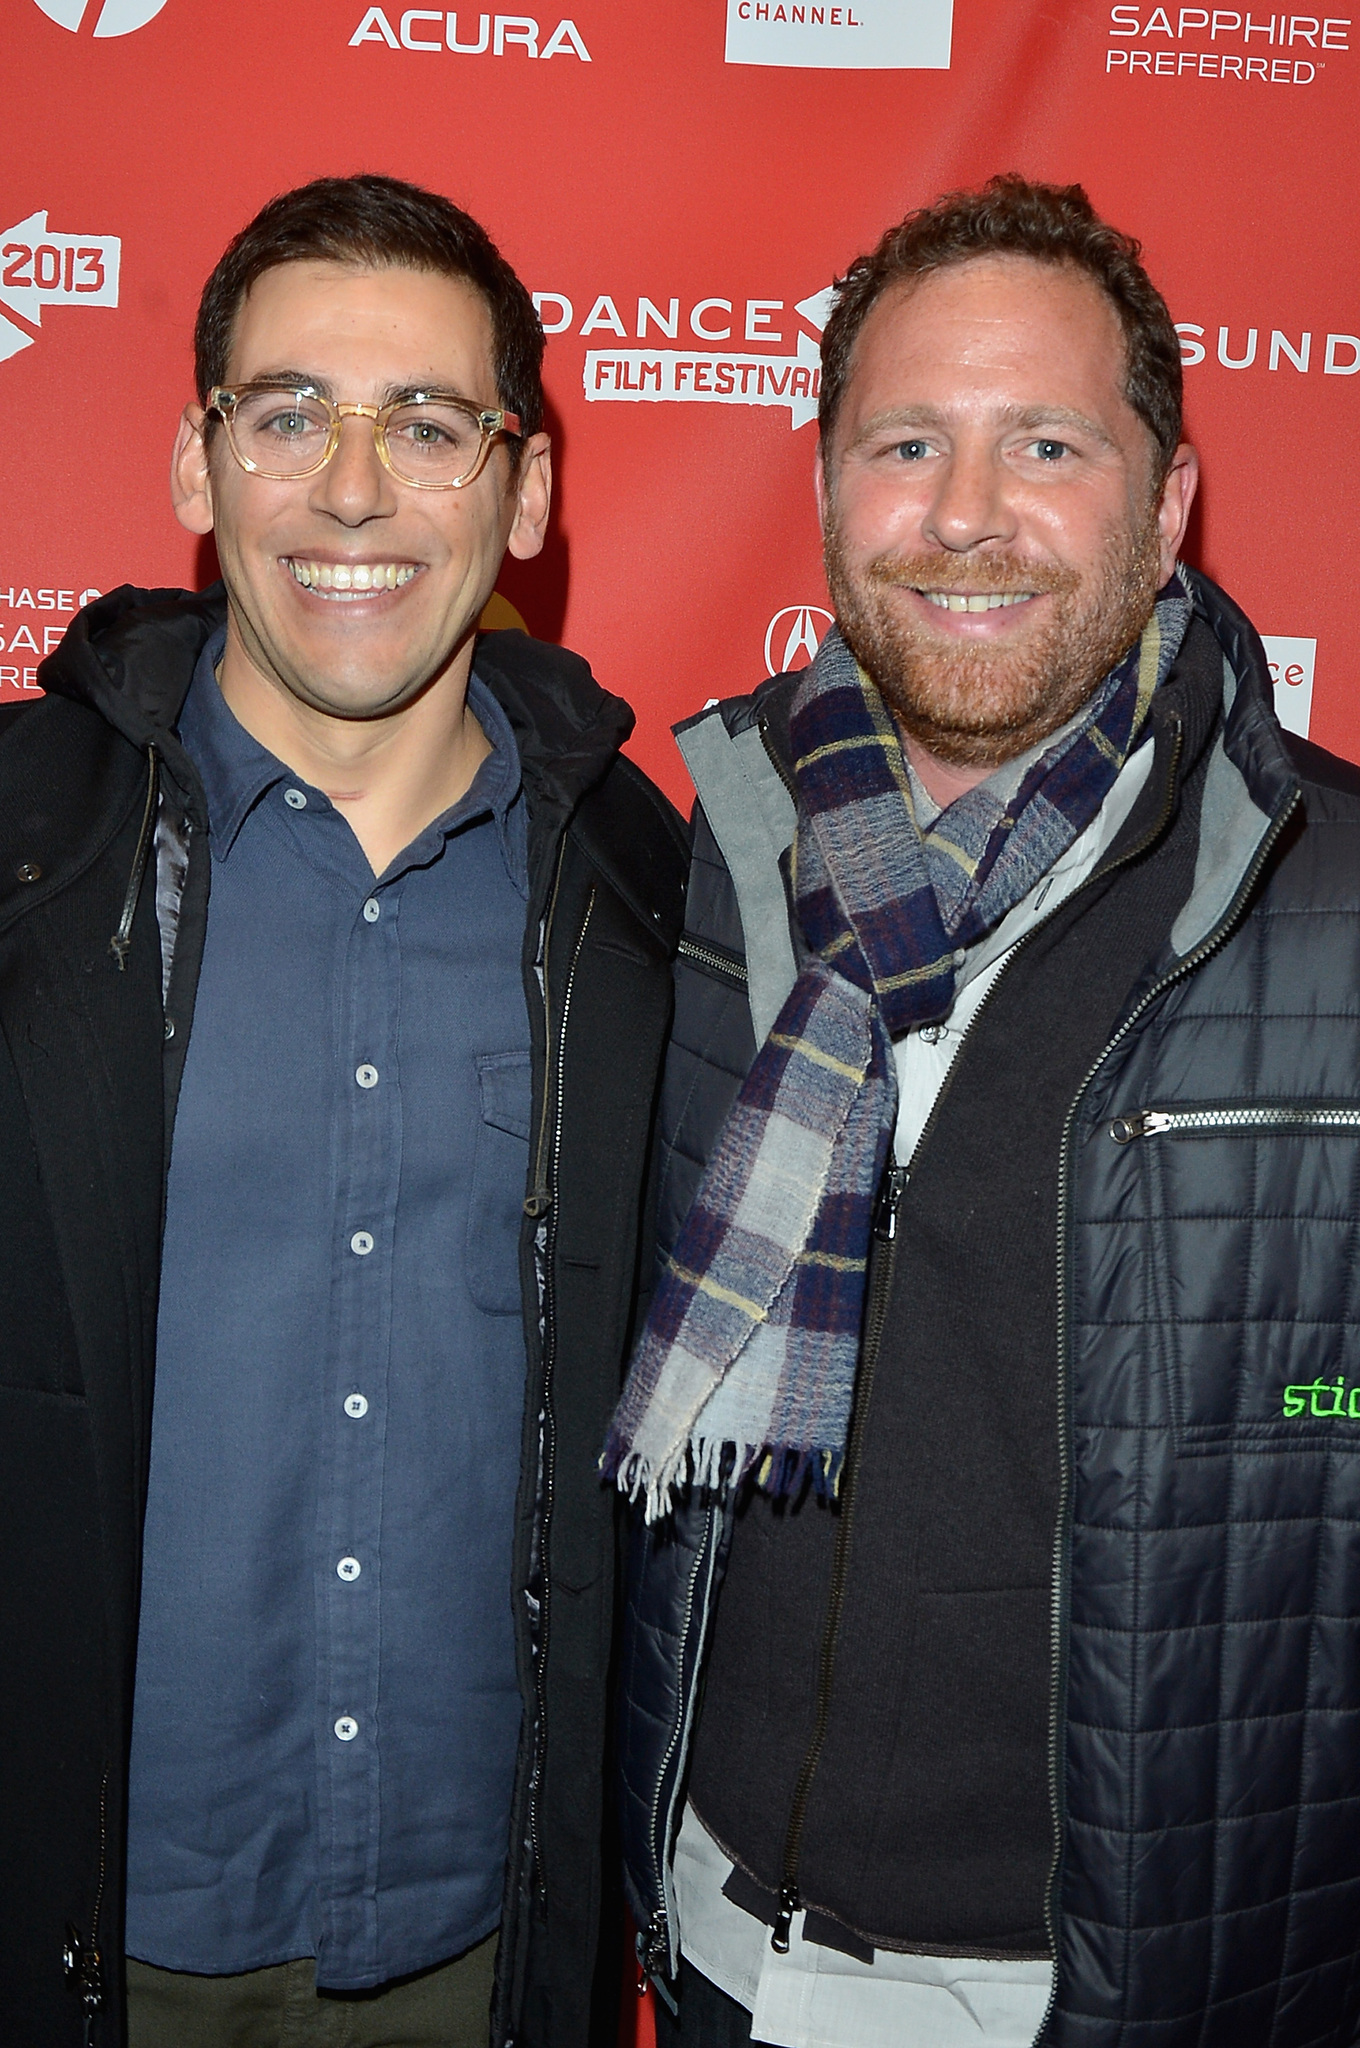 Ben Karlin and Stu Zicherman at event of A.C.O.D. (2013)